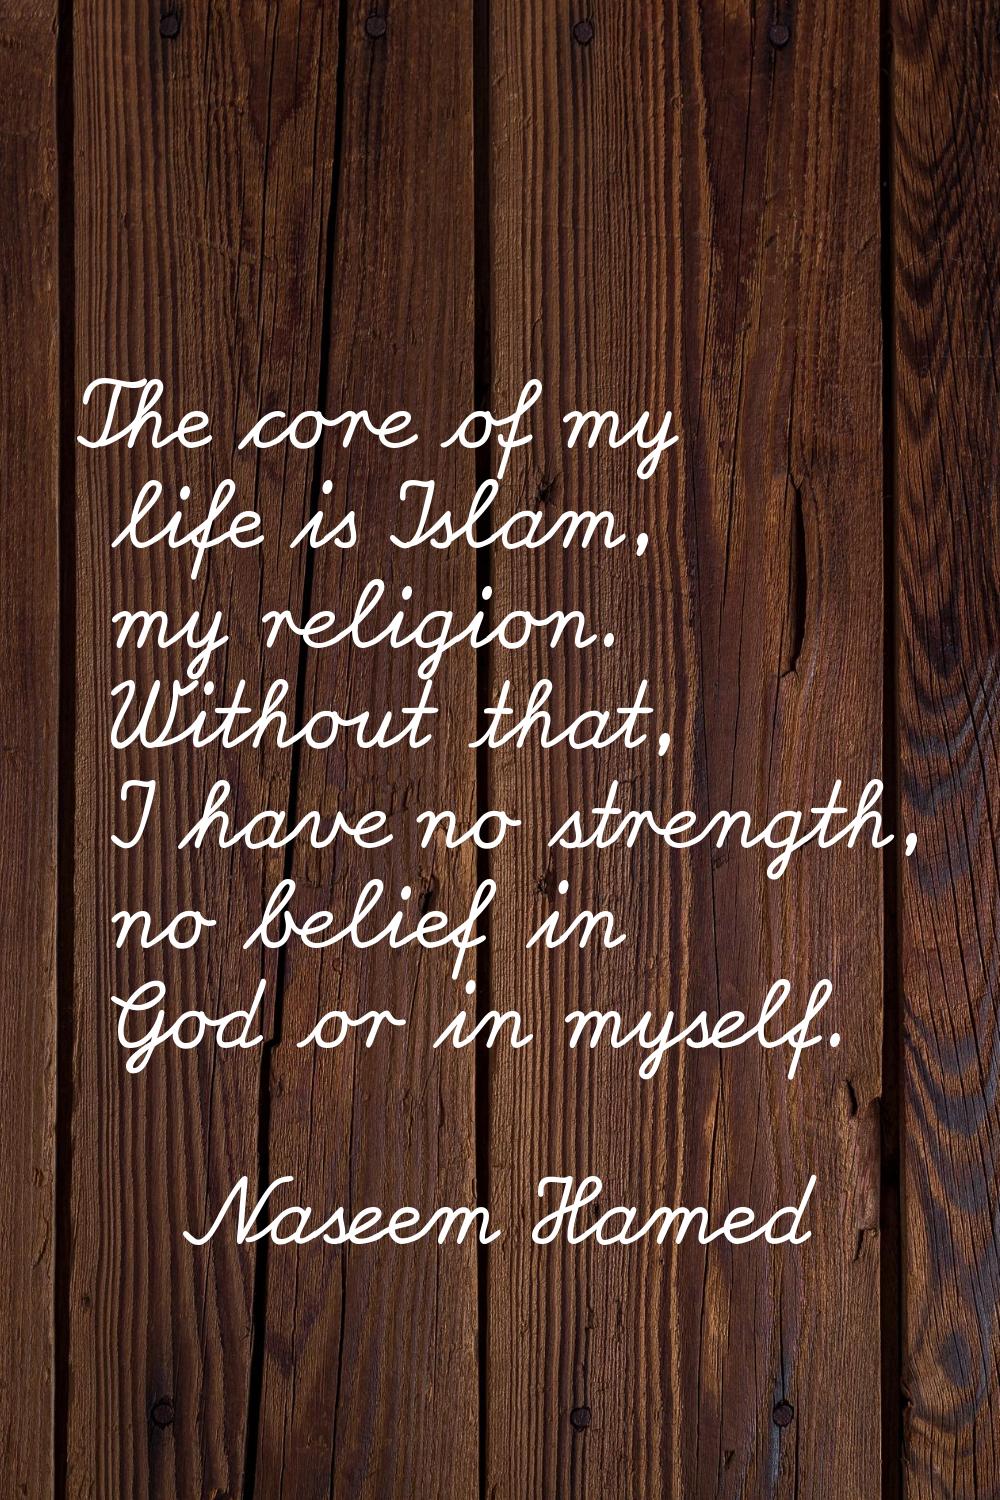 The core of my life is Islam, my religion. Without that, I have no strength, no belief in God or in